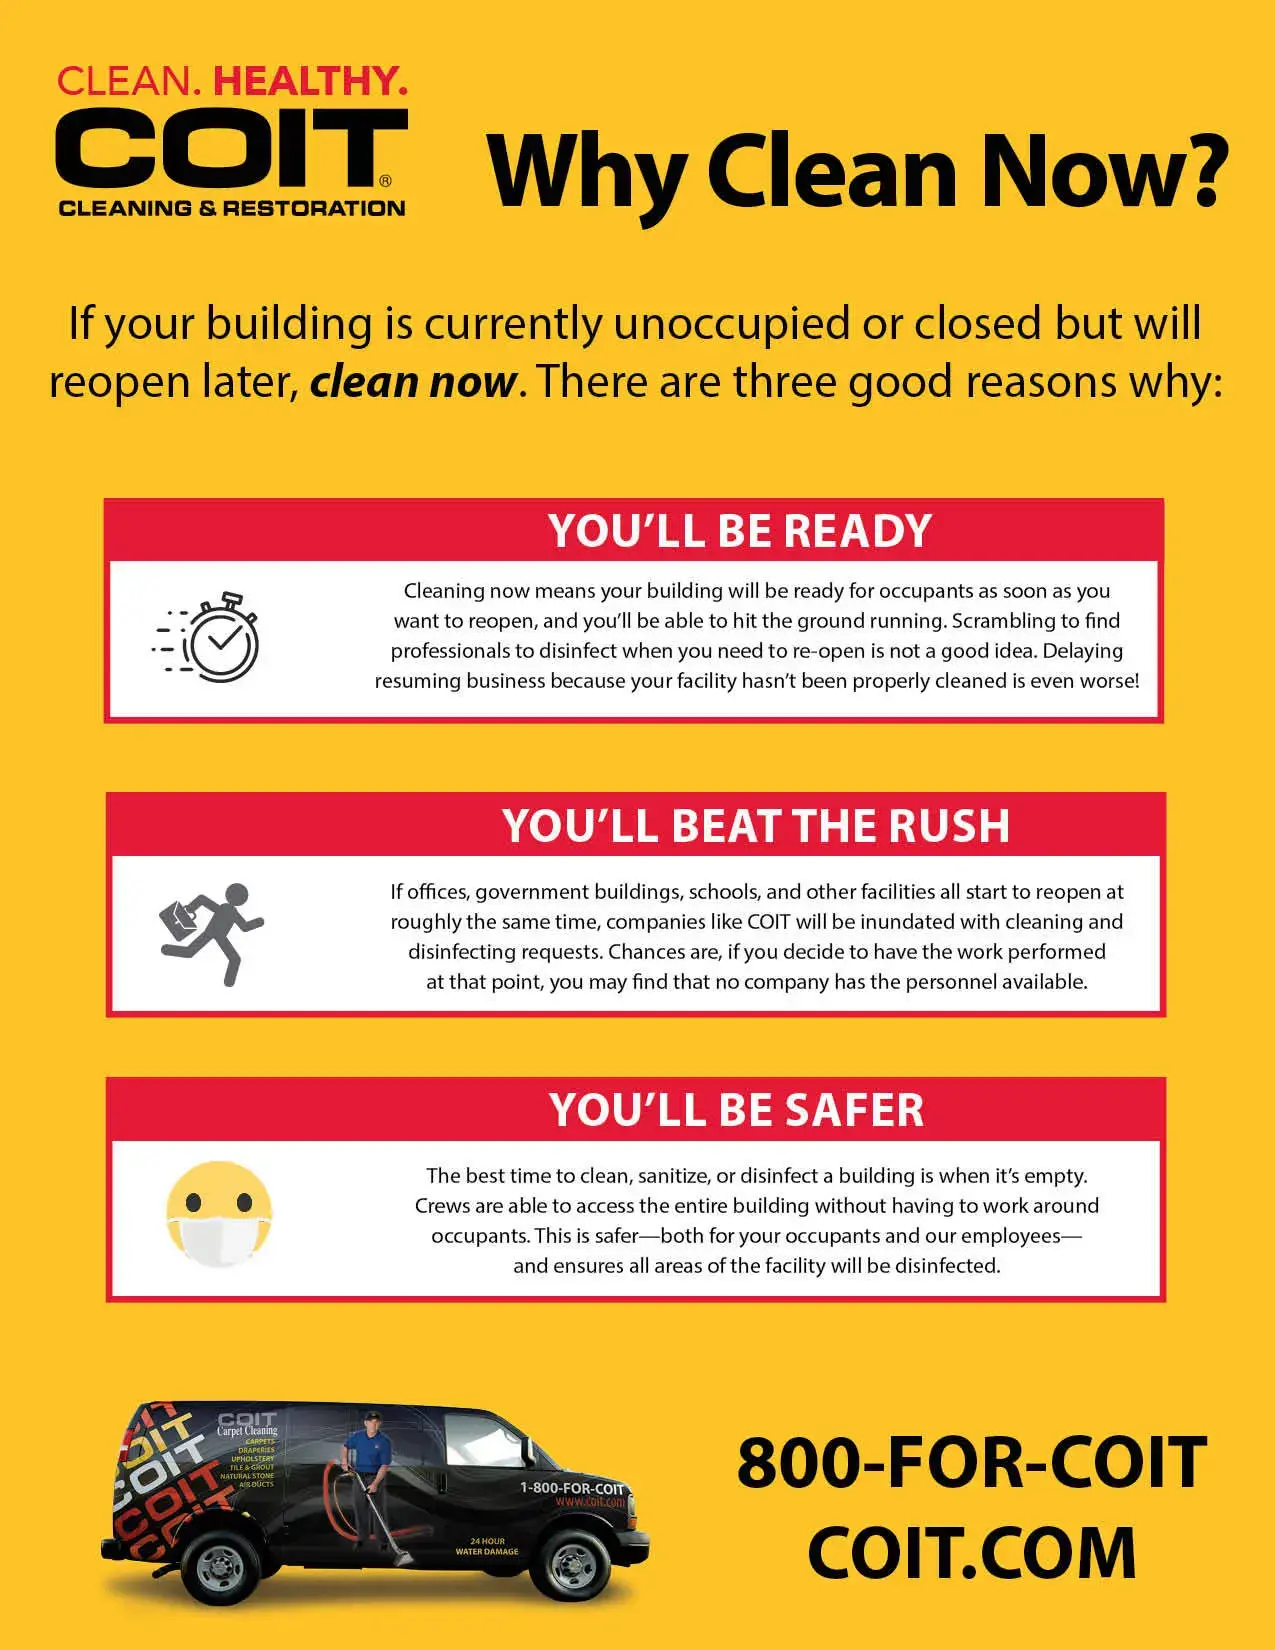 If your building is currently unoccupied or closed but will reopen later, clean now. There are three good reasons why: You'll be ready, you'll beat the rush, you'll be safer